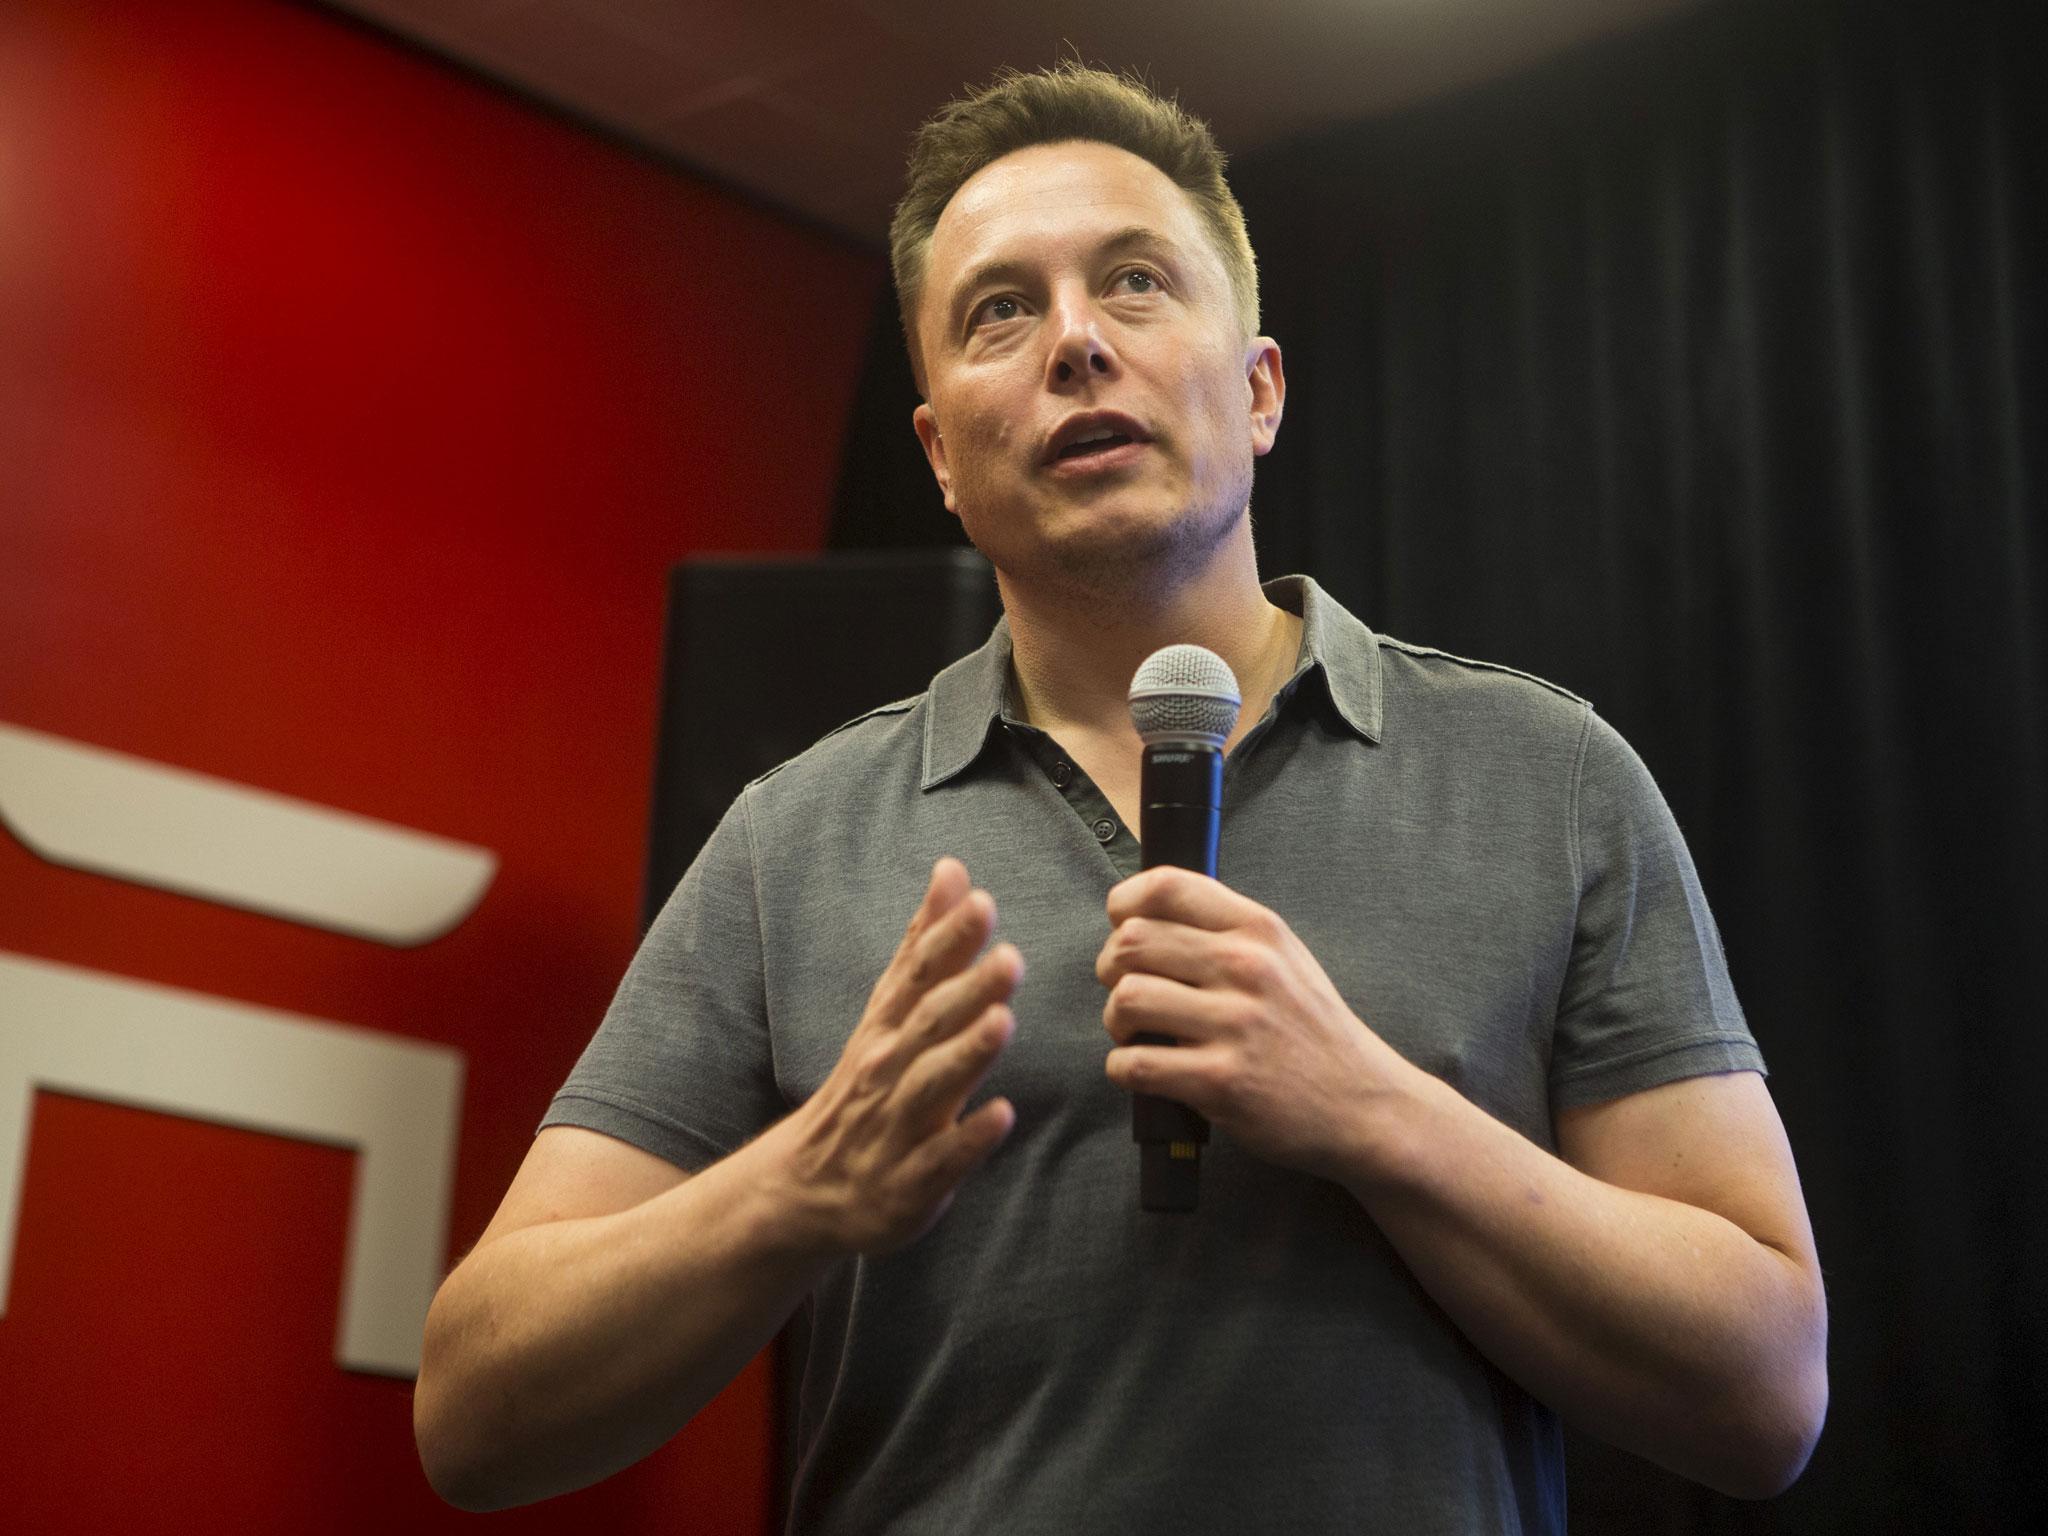 Tech genius Elon Musk dreamed up the plan while stuck in a traffic jam